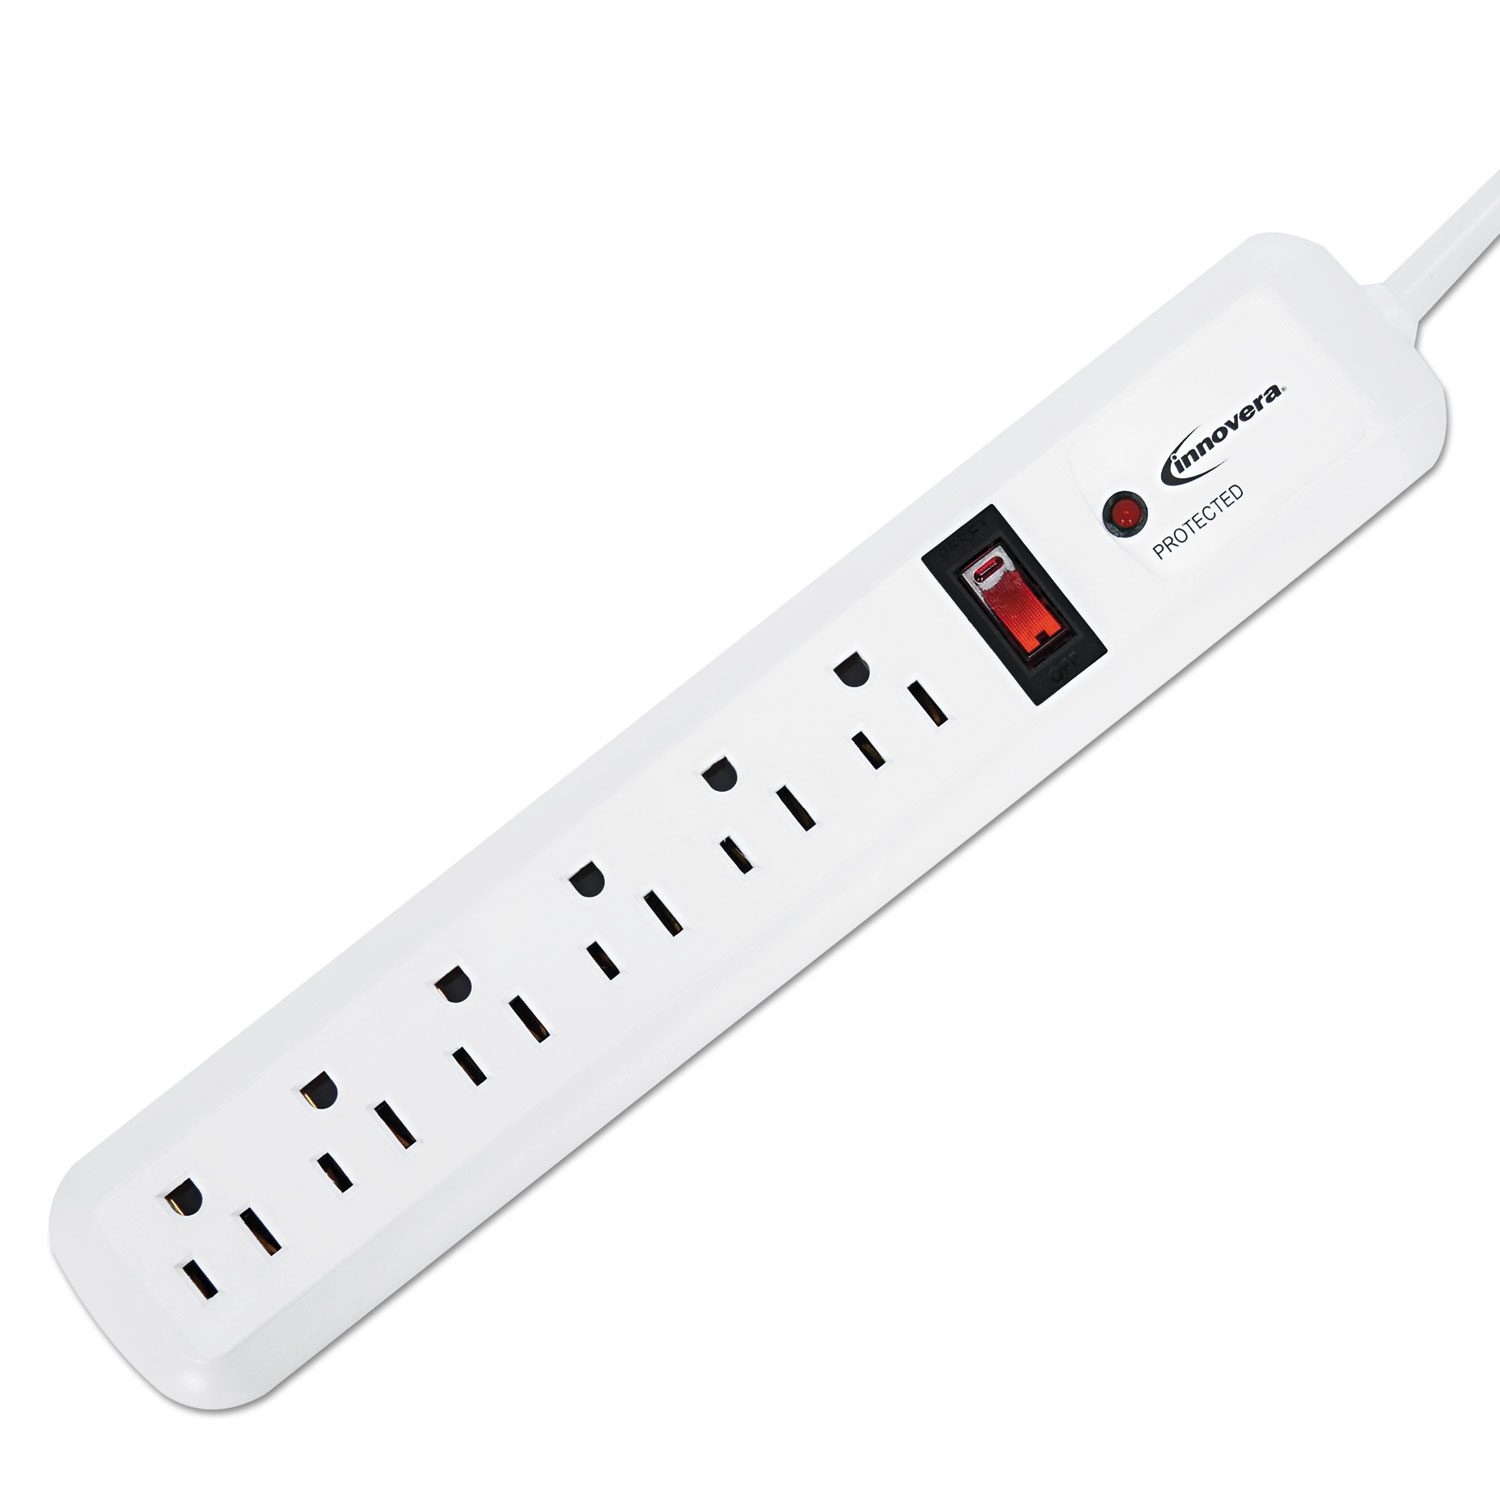  Innovera IVR71652 Surge Protector, 6 Outlets, 4 ft Cord, 540 Joules, White (IVR71652) 